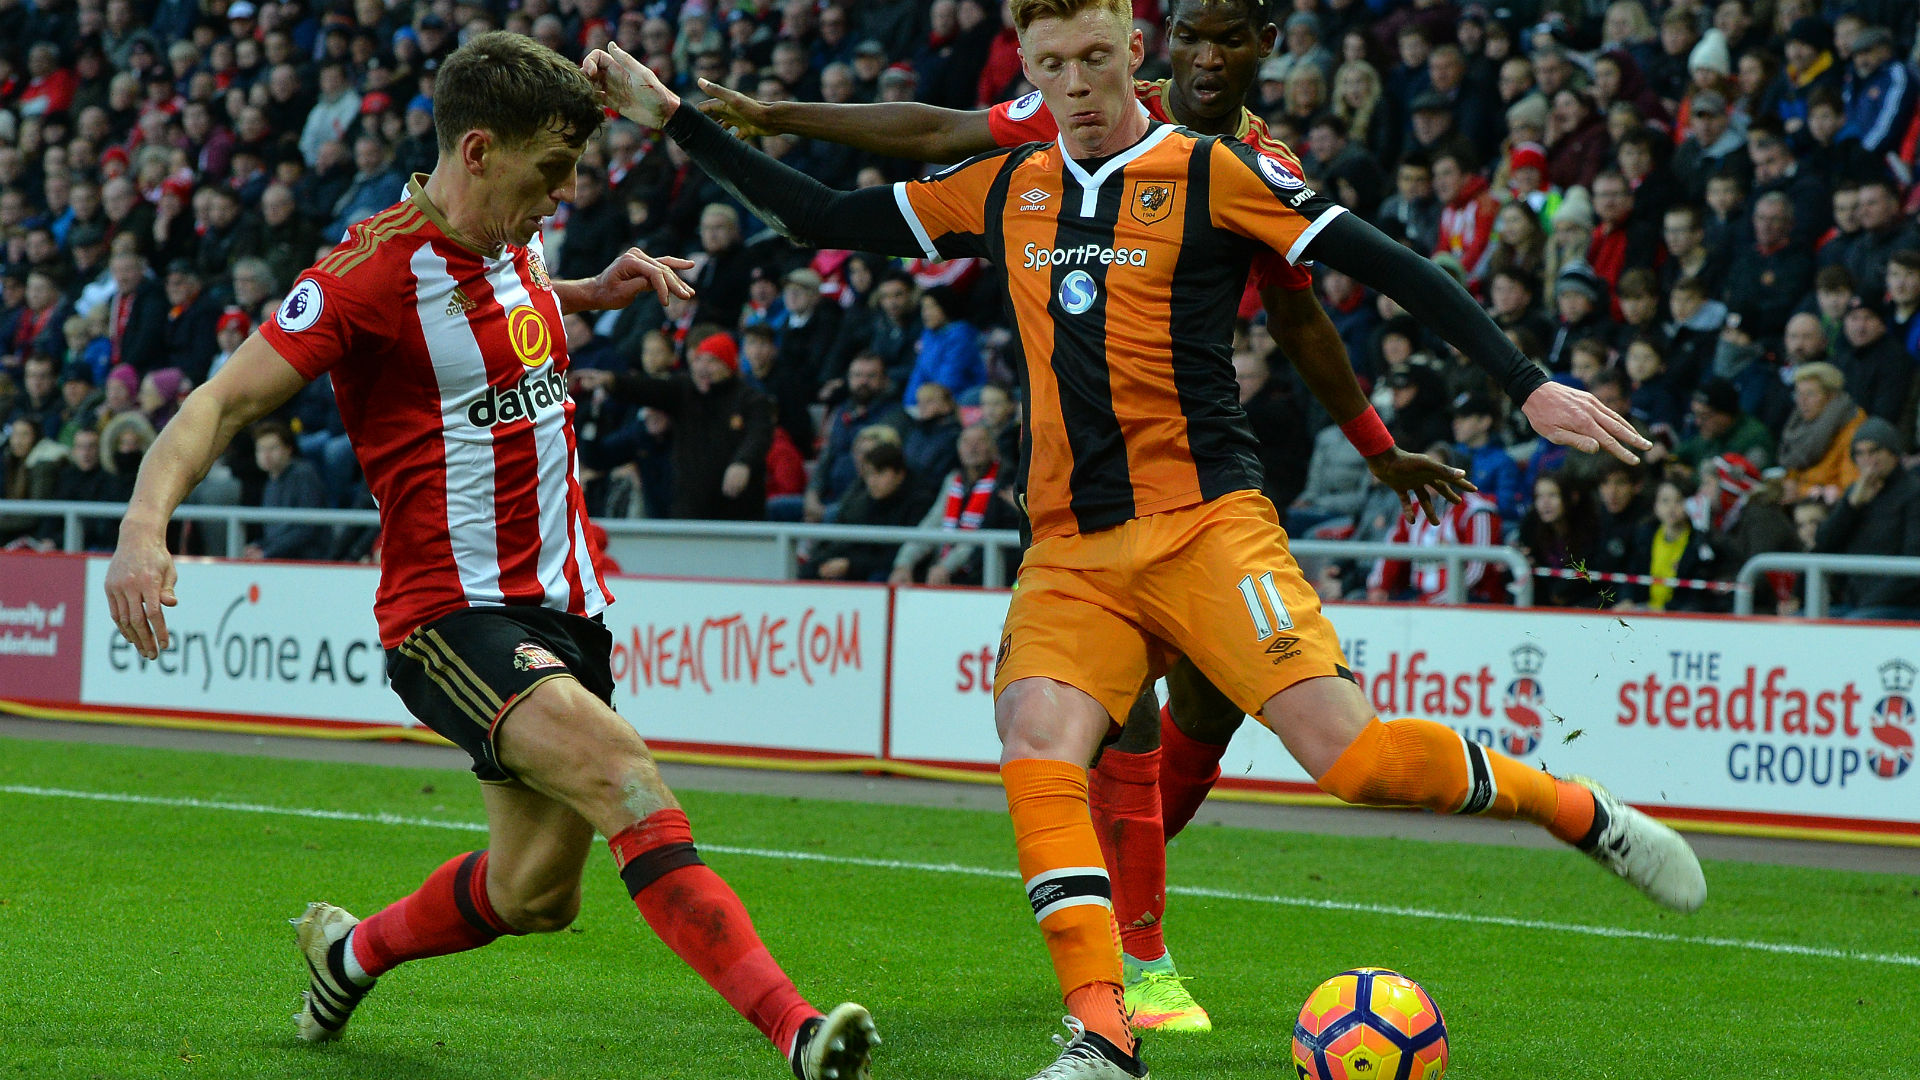 Sunderland 3 0 Hull Aniche at the double to secure vital win